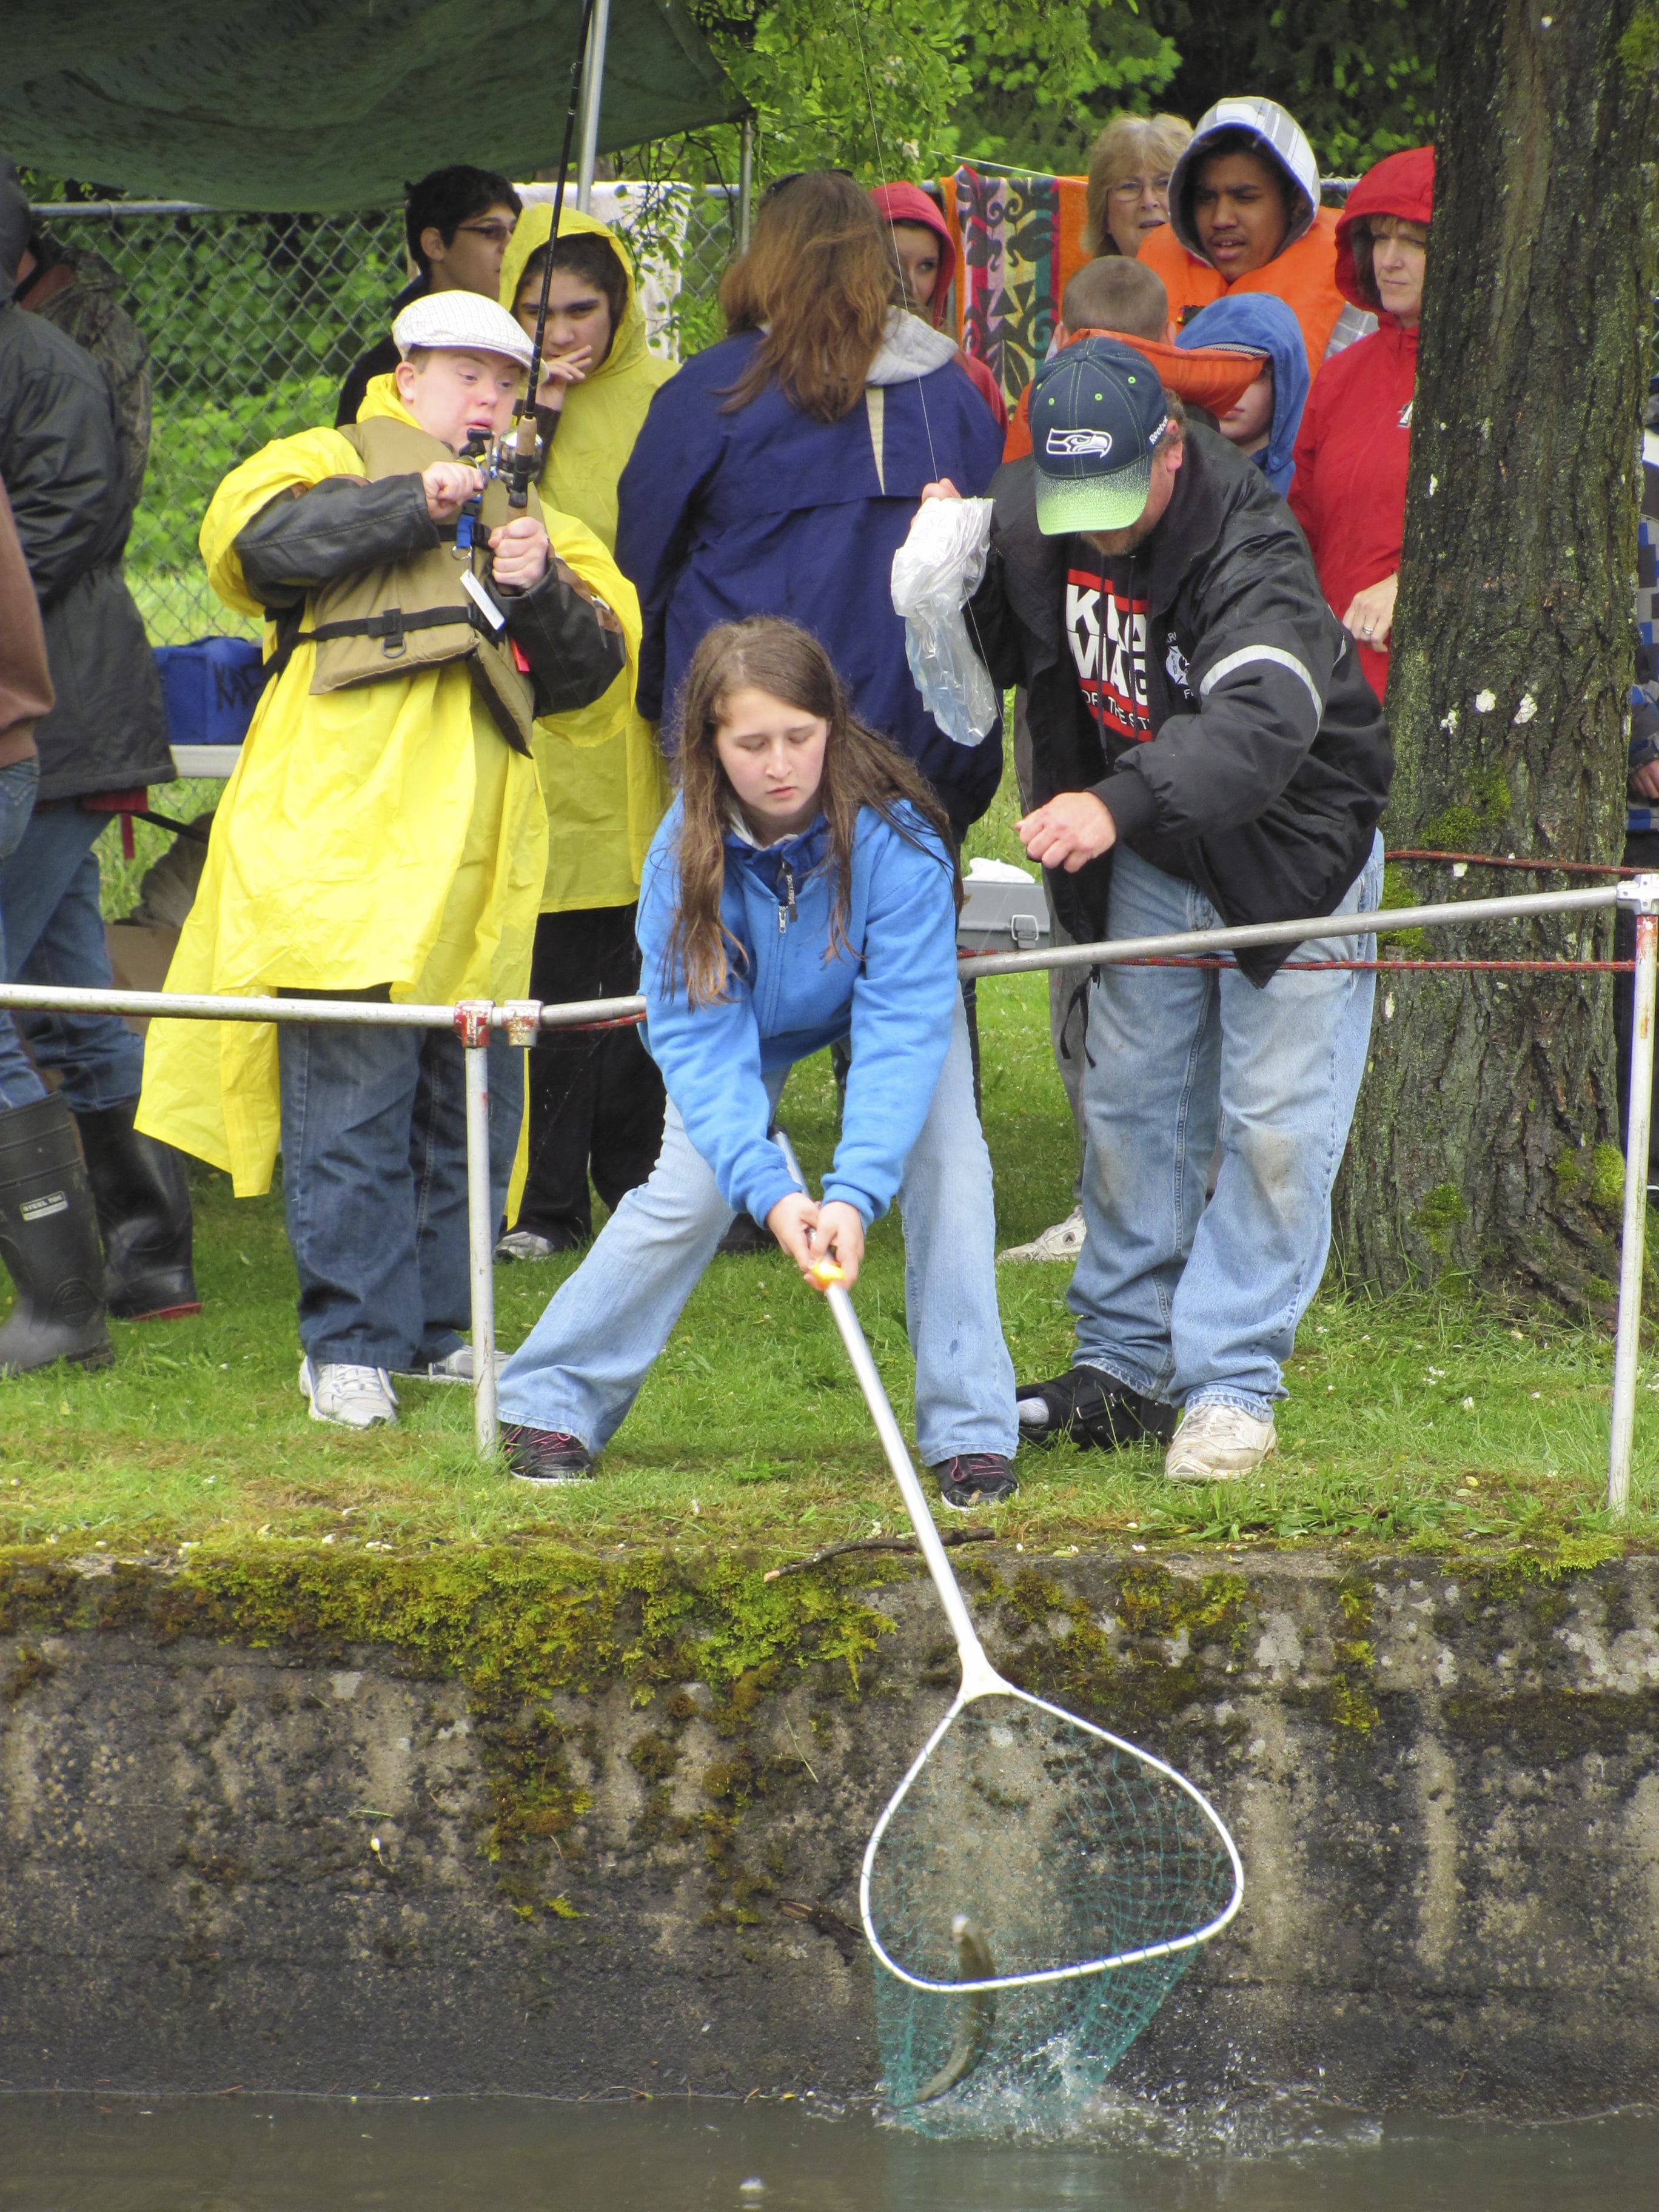 Once youngsters reeled in their catch, Moose Lodge volunteers helped snatch the fish from the water, remove the hook, then clean it.